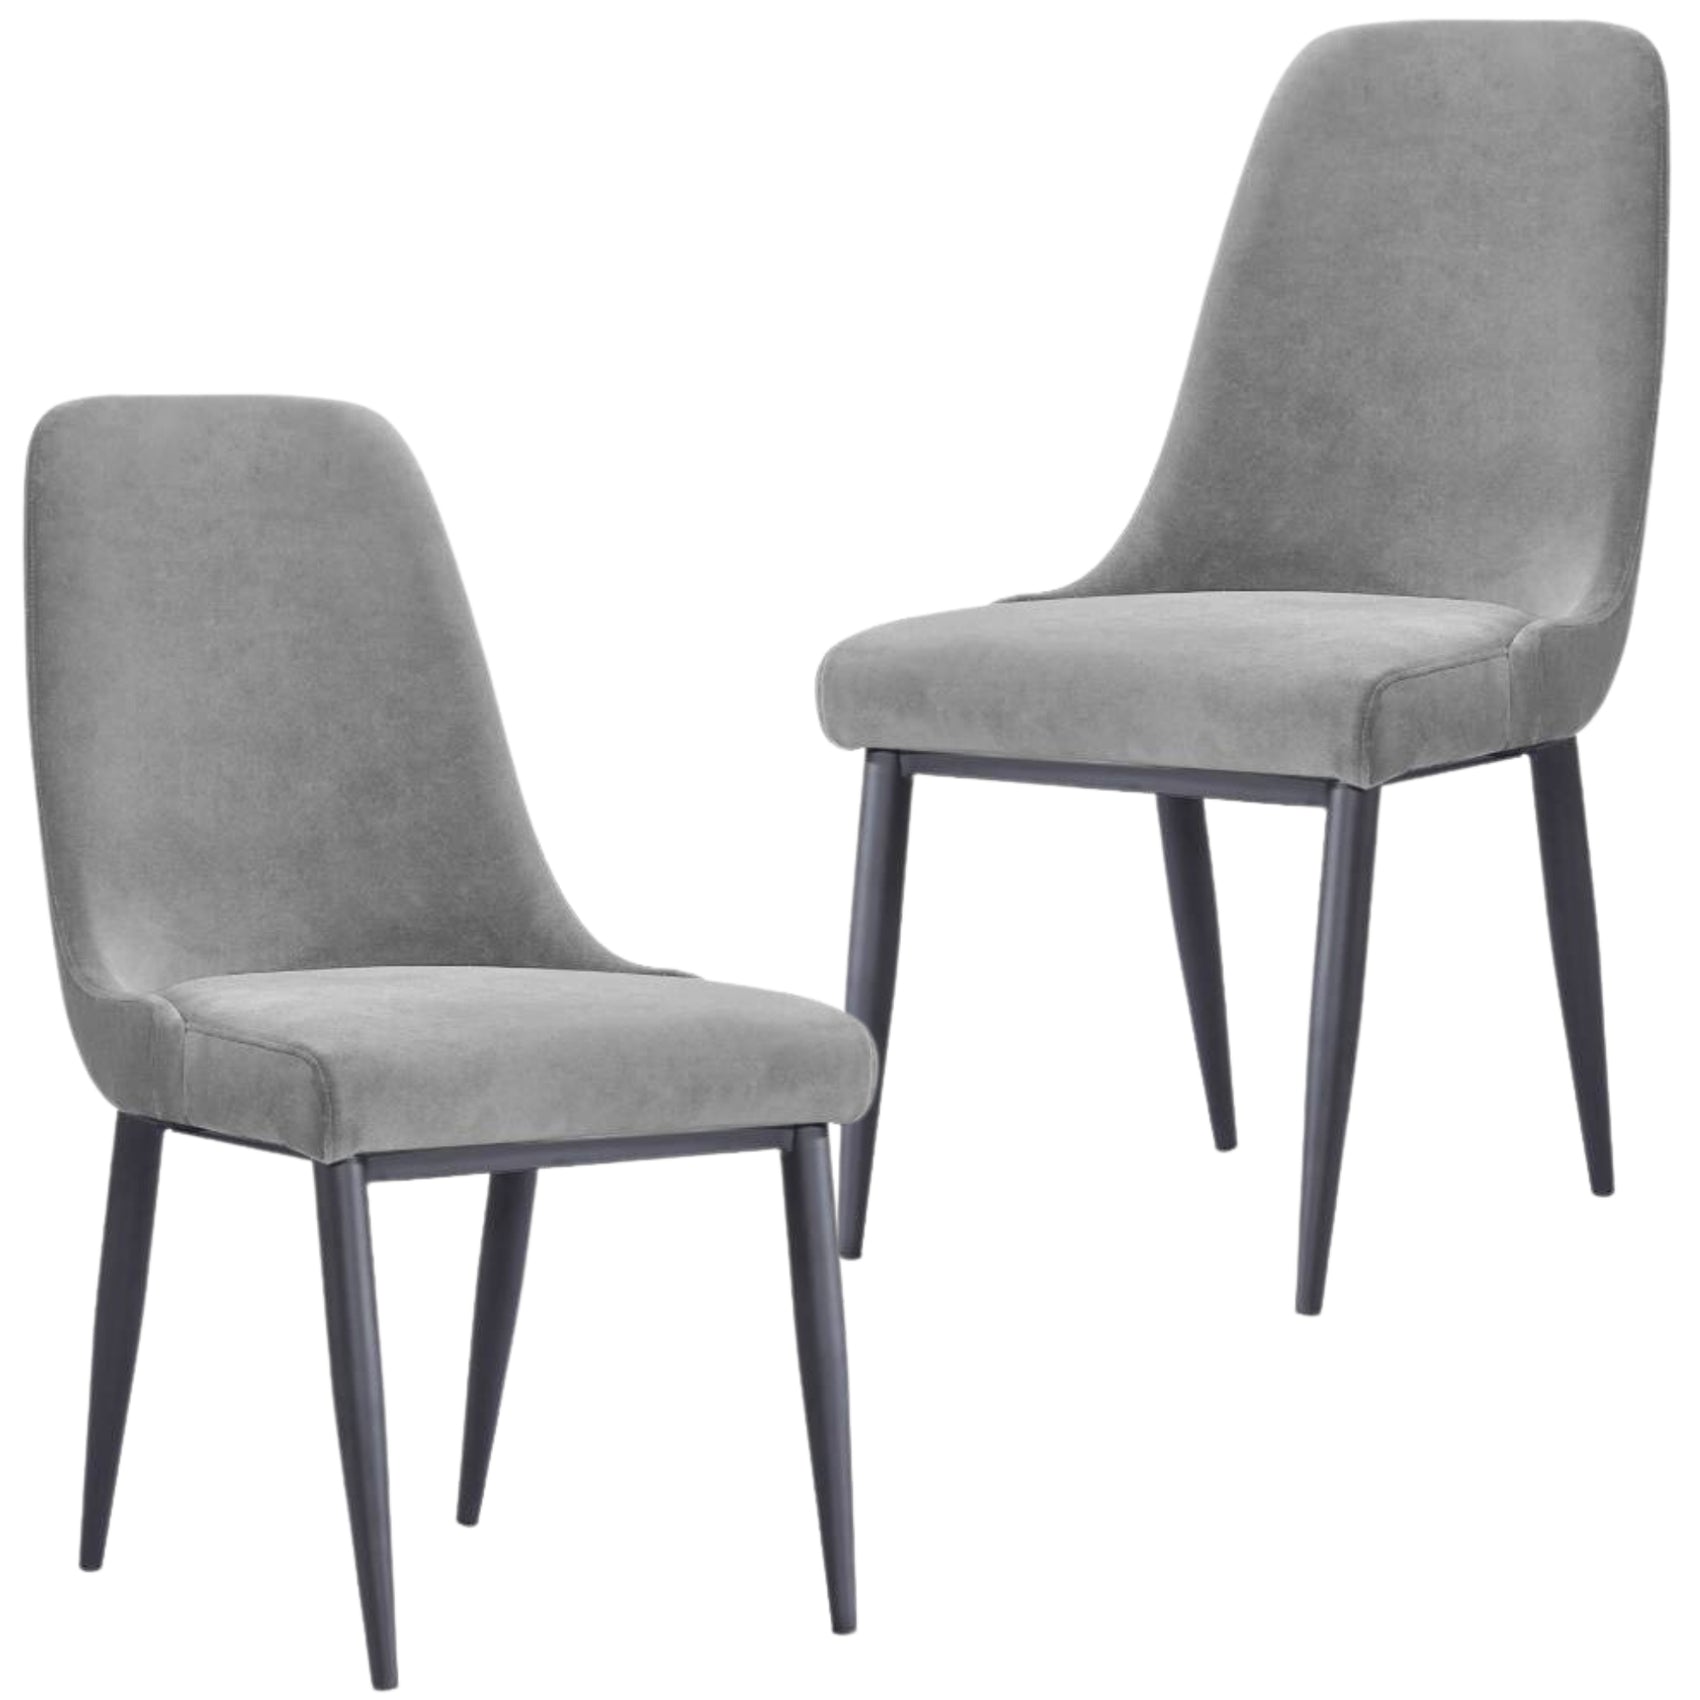 Eva Dining Chair Set of 2 Fabric Seat with Metal Frame - Grey